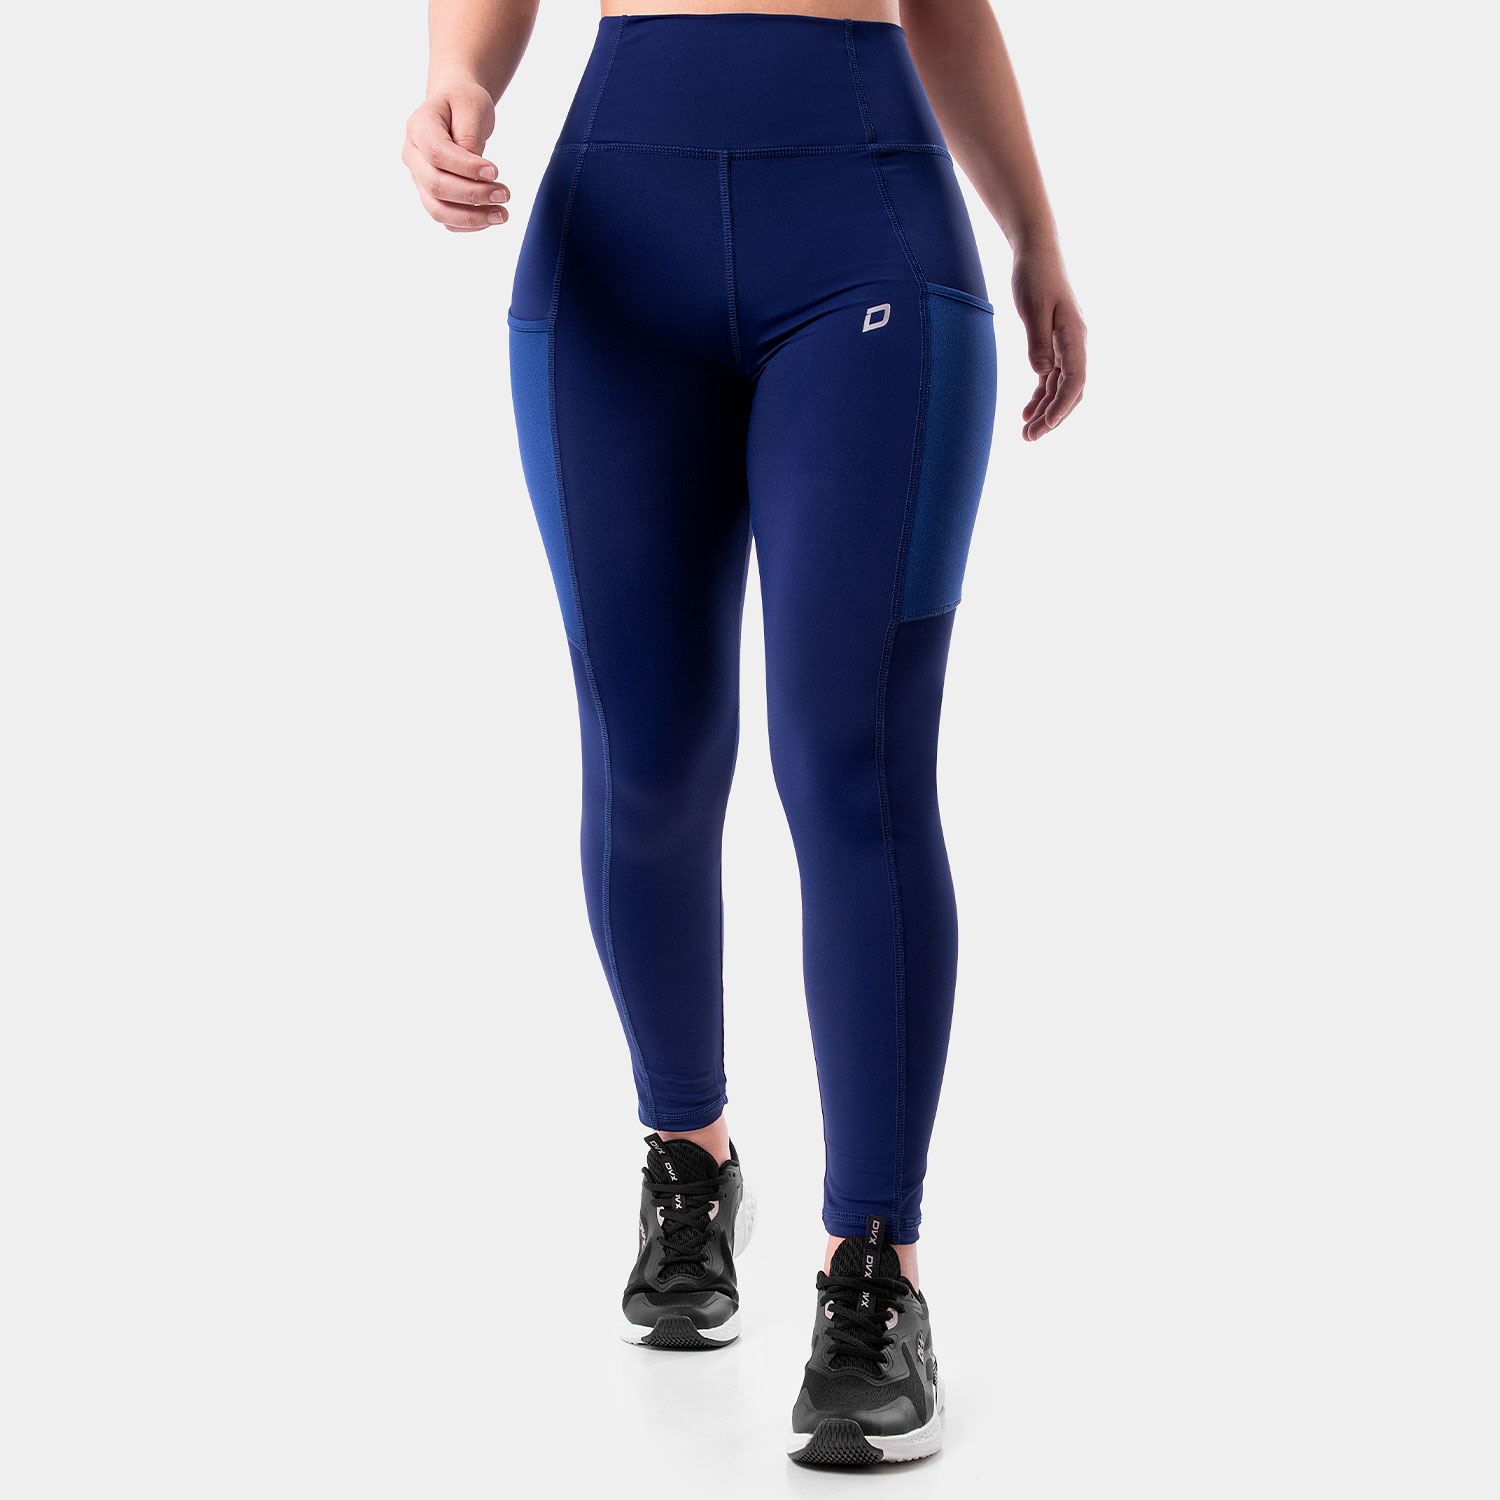 Leggins ropa deportiva para mujer, Marca CONNECTION 18, Size L. 